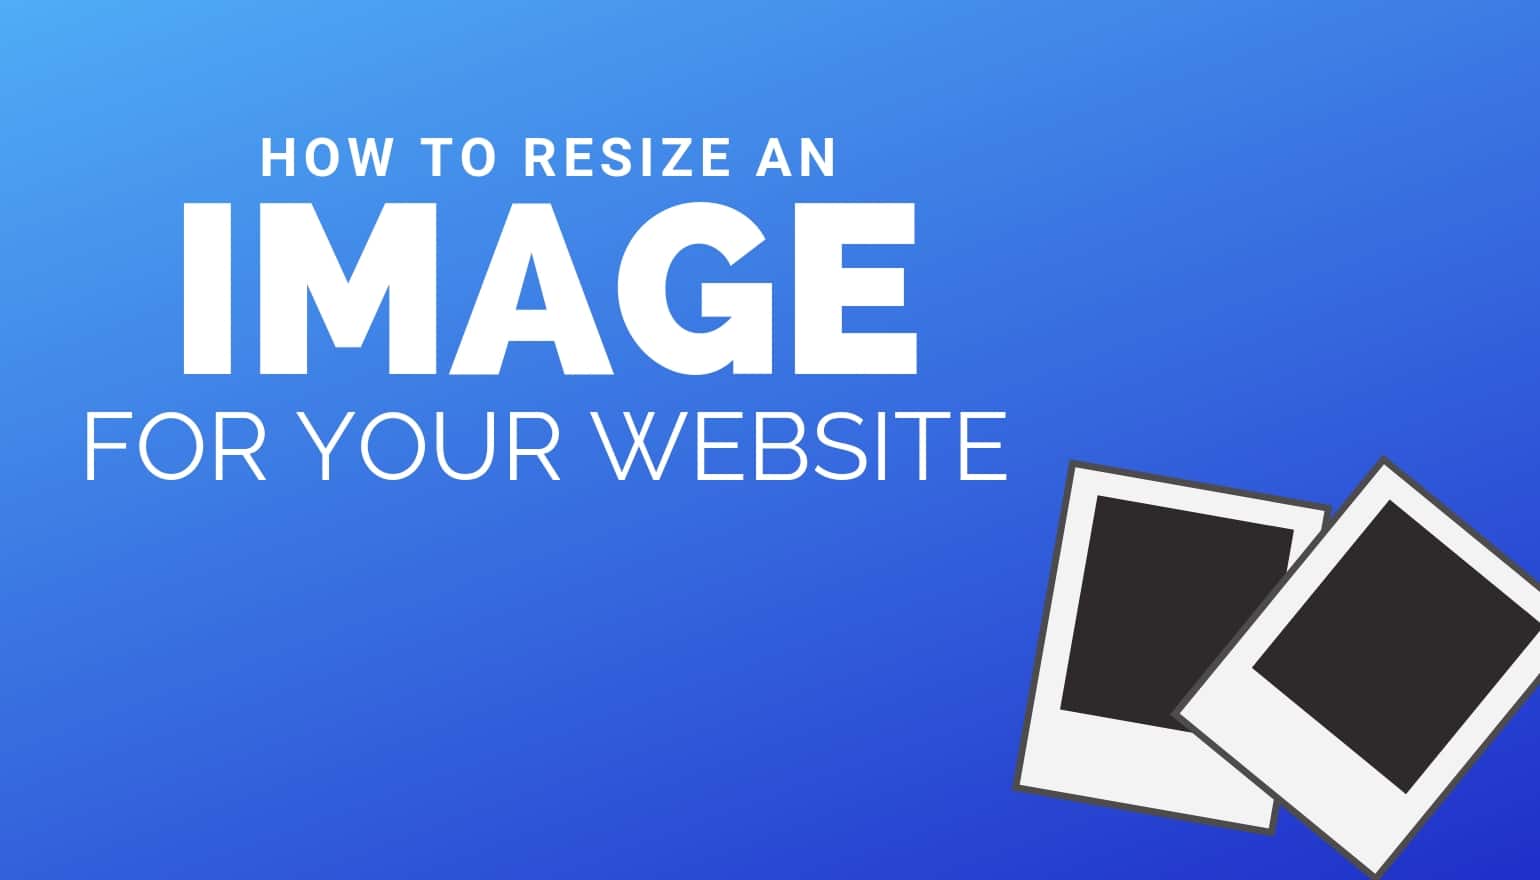 How To Resize An Image In Wordpress Without Losing - HD Wallpaper 